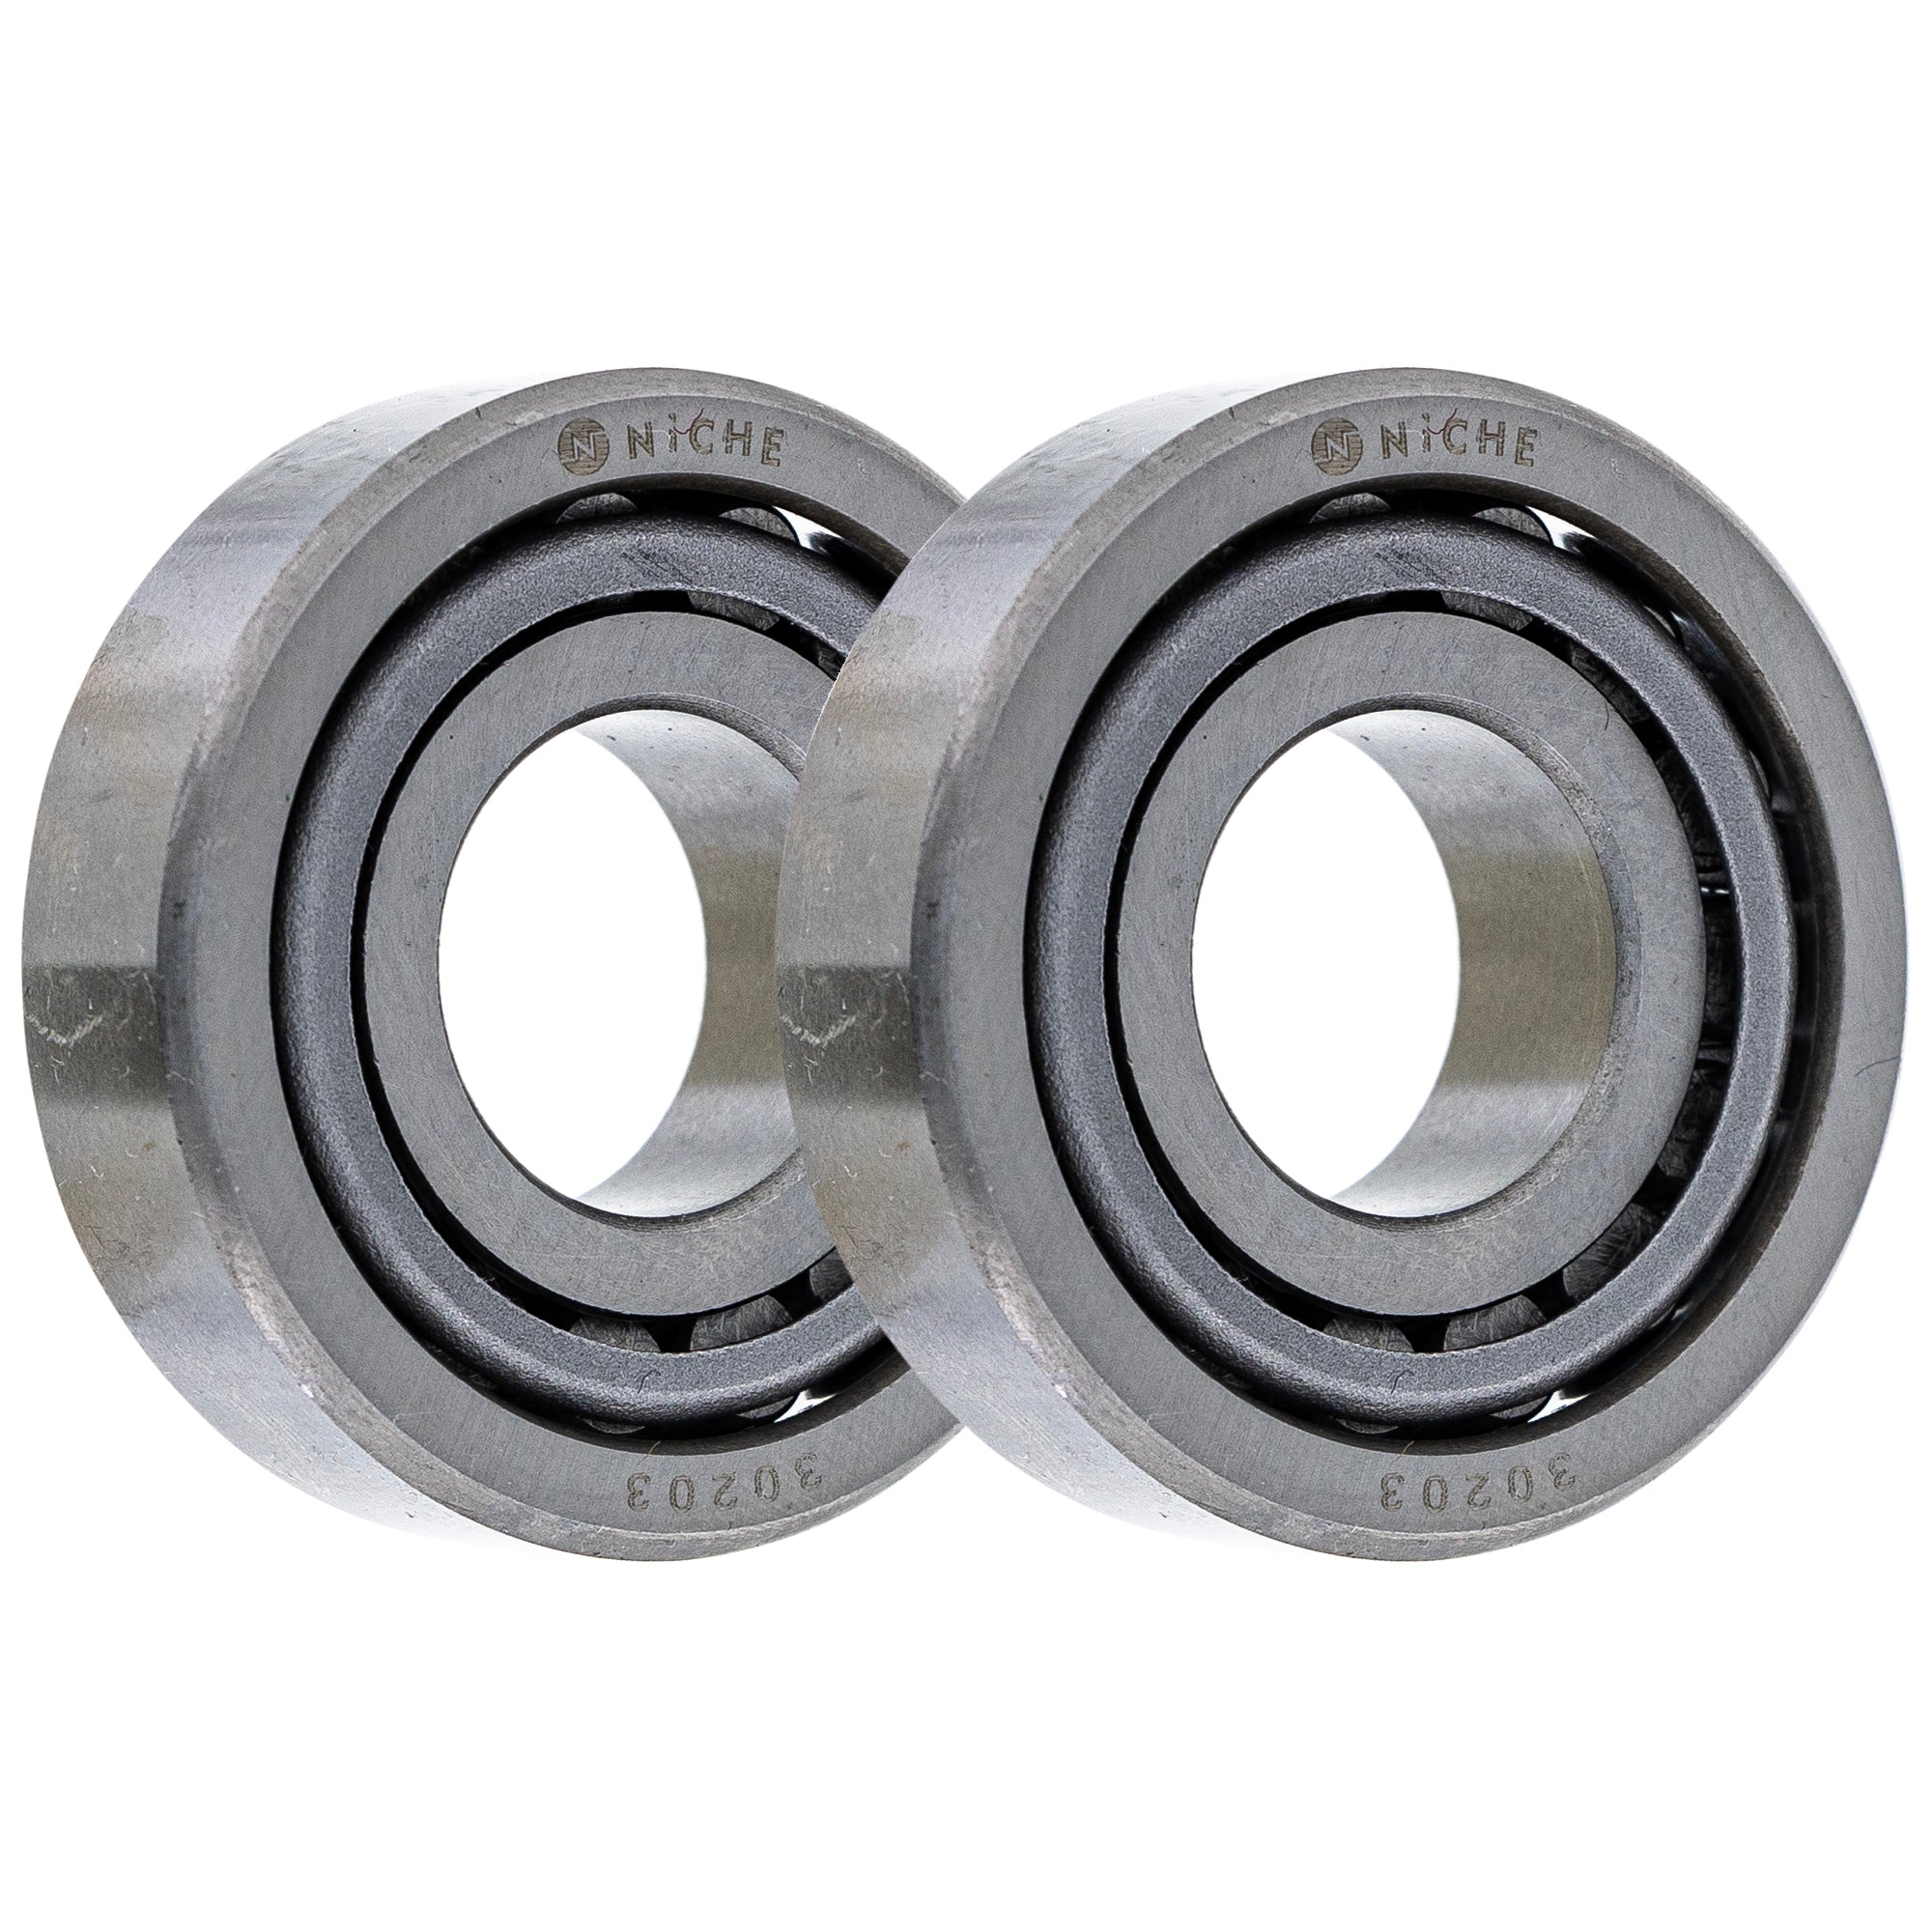 Tapered Roller Bearing Pack of 2 2-Pack for zOTHER R90S R80ST R80RT R80GS NICHE 519-CBB2323R